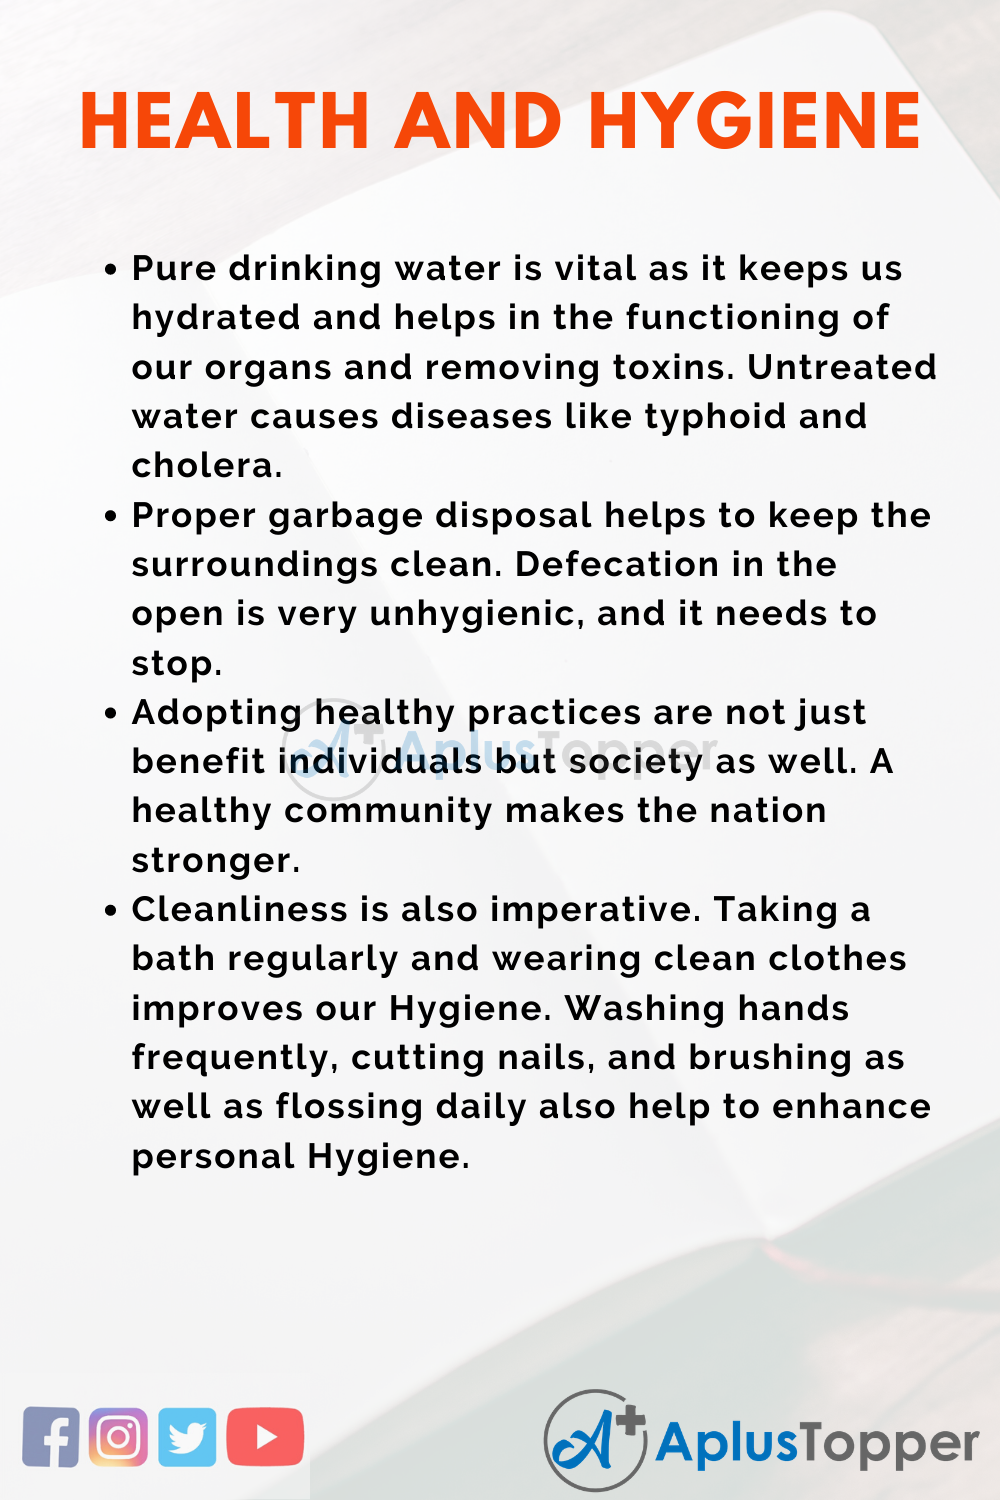 health and hygiene essay for class 10